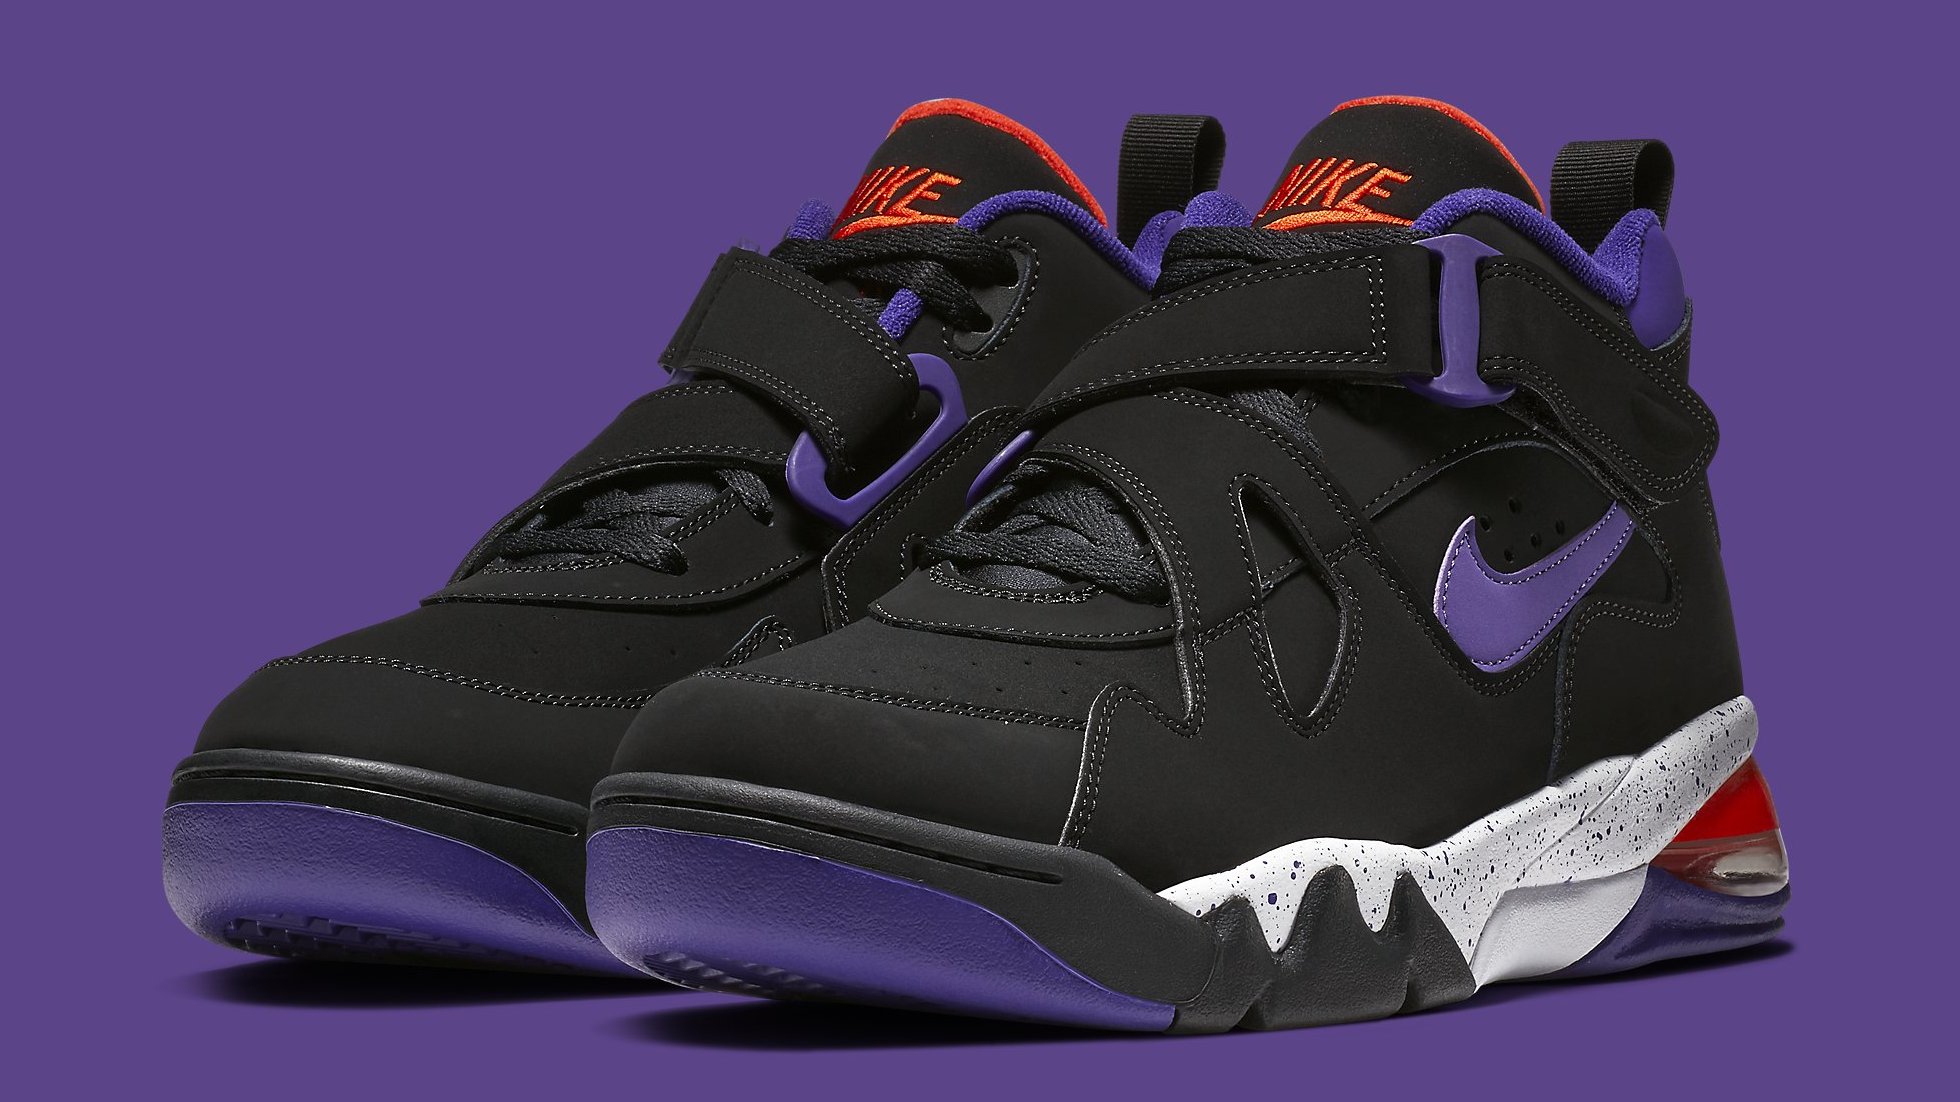 Barkley's Nike Air Force Max CB Releasing in Suns-Inspired